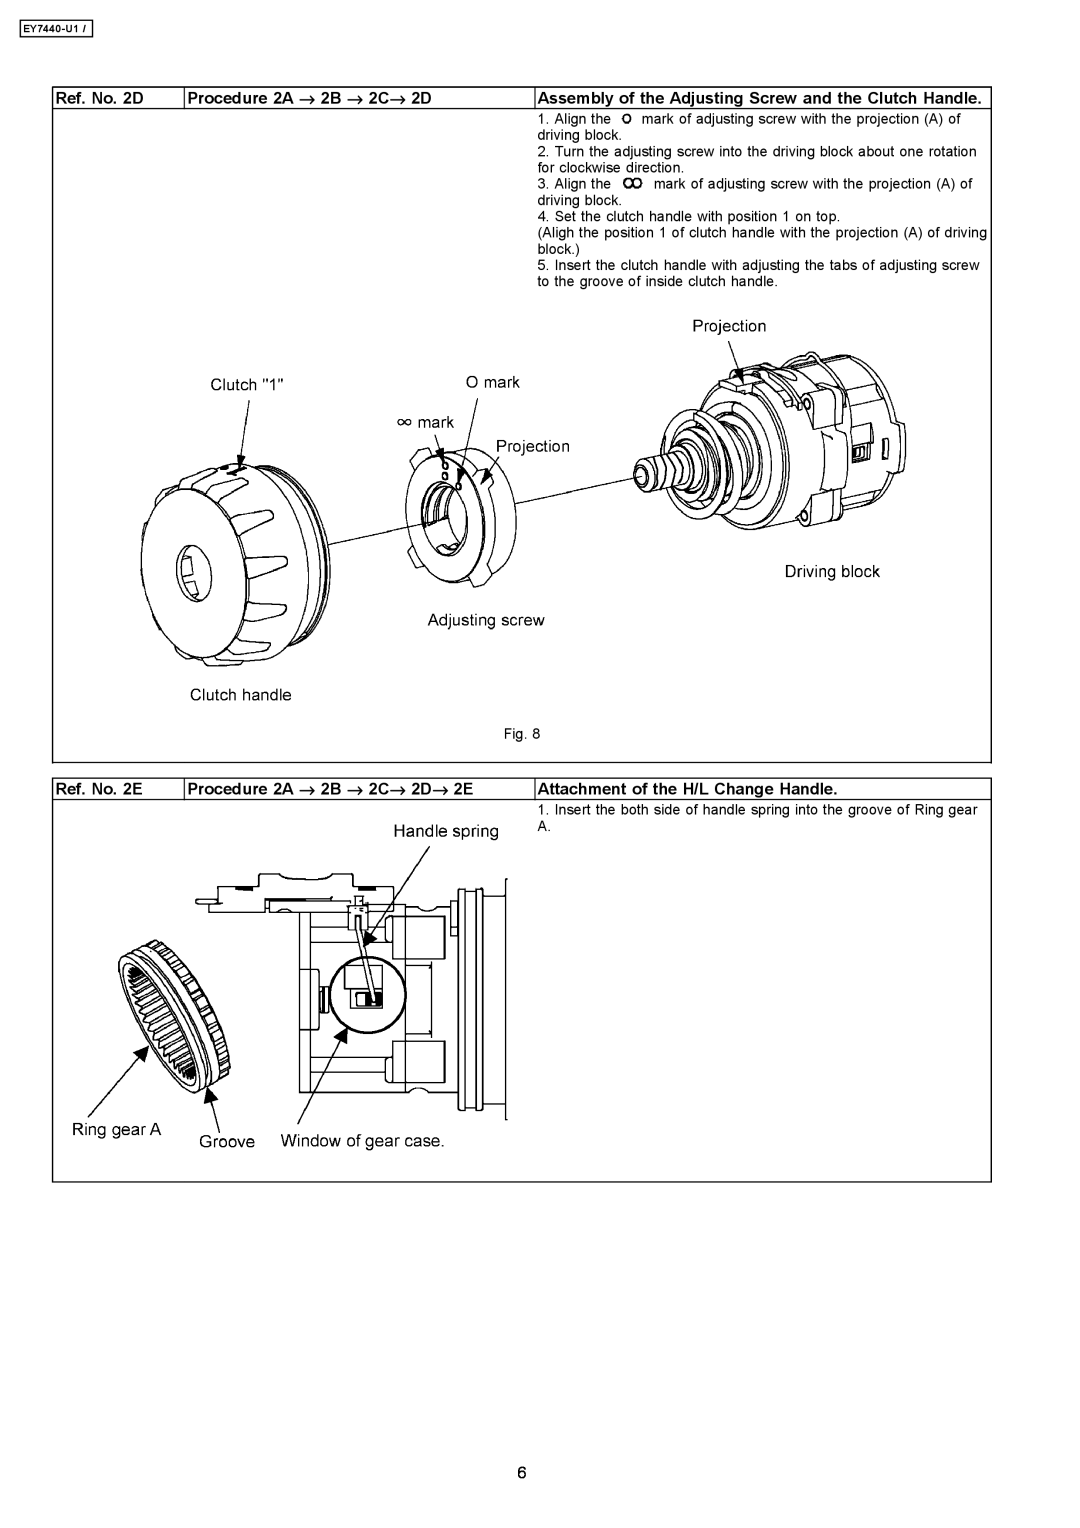 Panasonic EY7440-U1 Ref. No. 2D, Procedure 2A → 2B → 2C→ 2D, Assembly of the Adjusting Screw and the Clutch Handle 